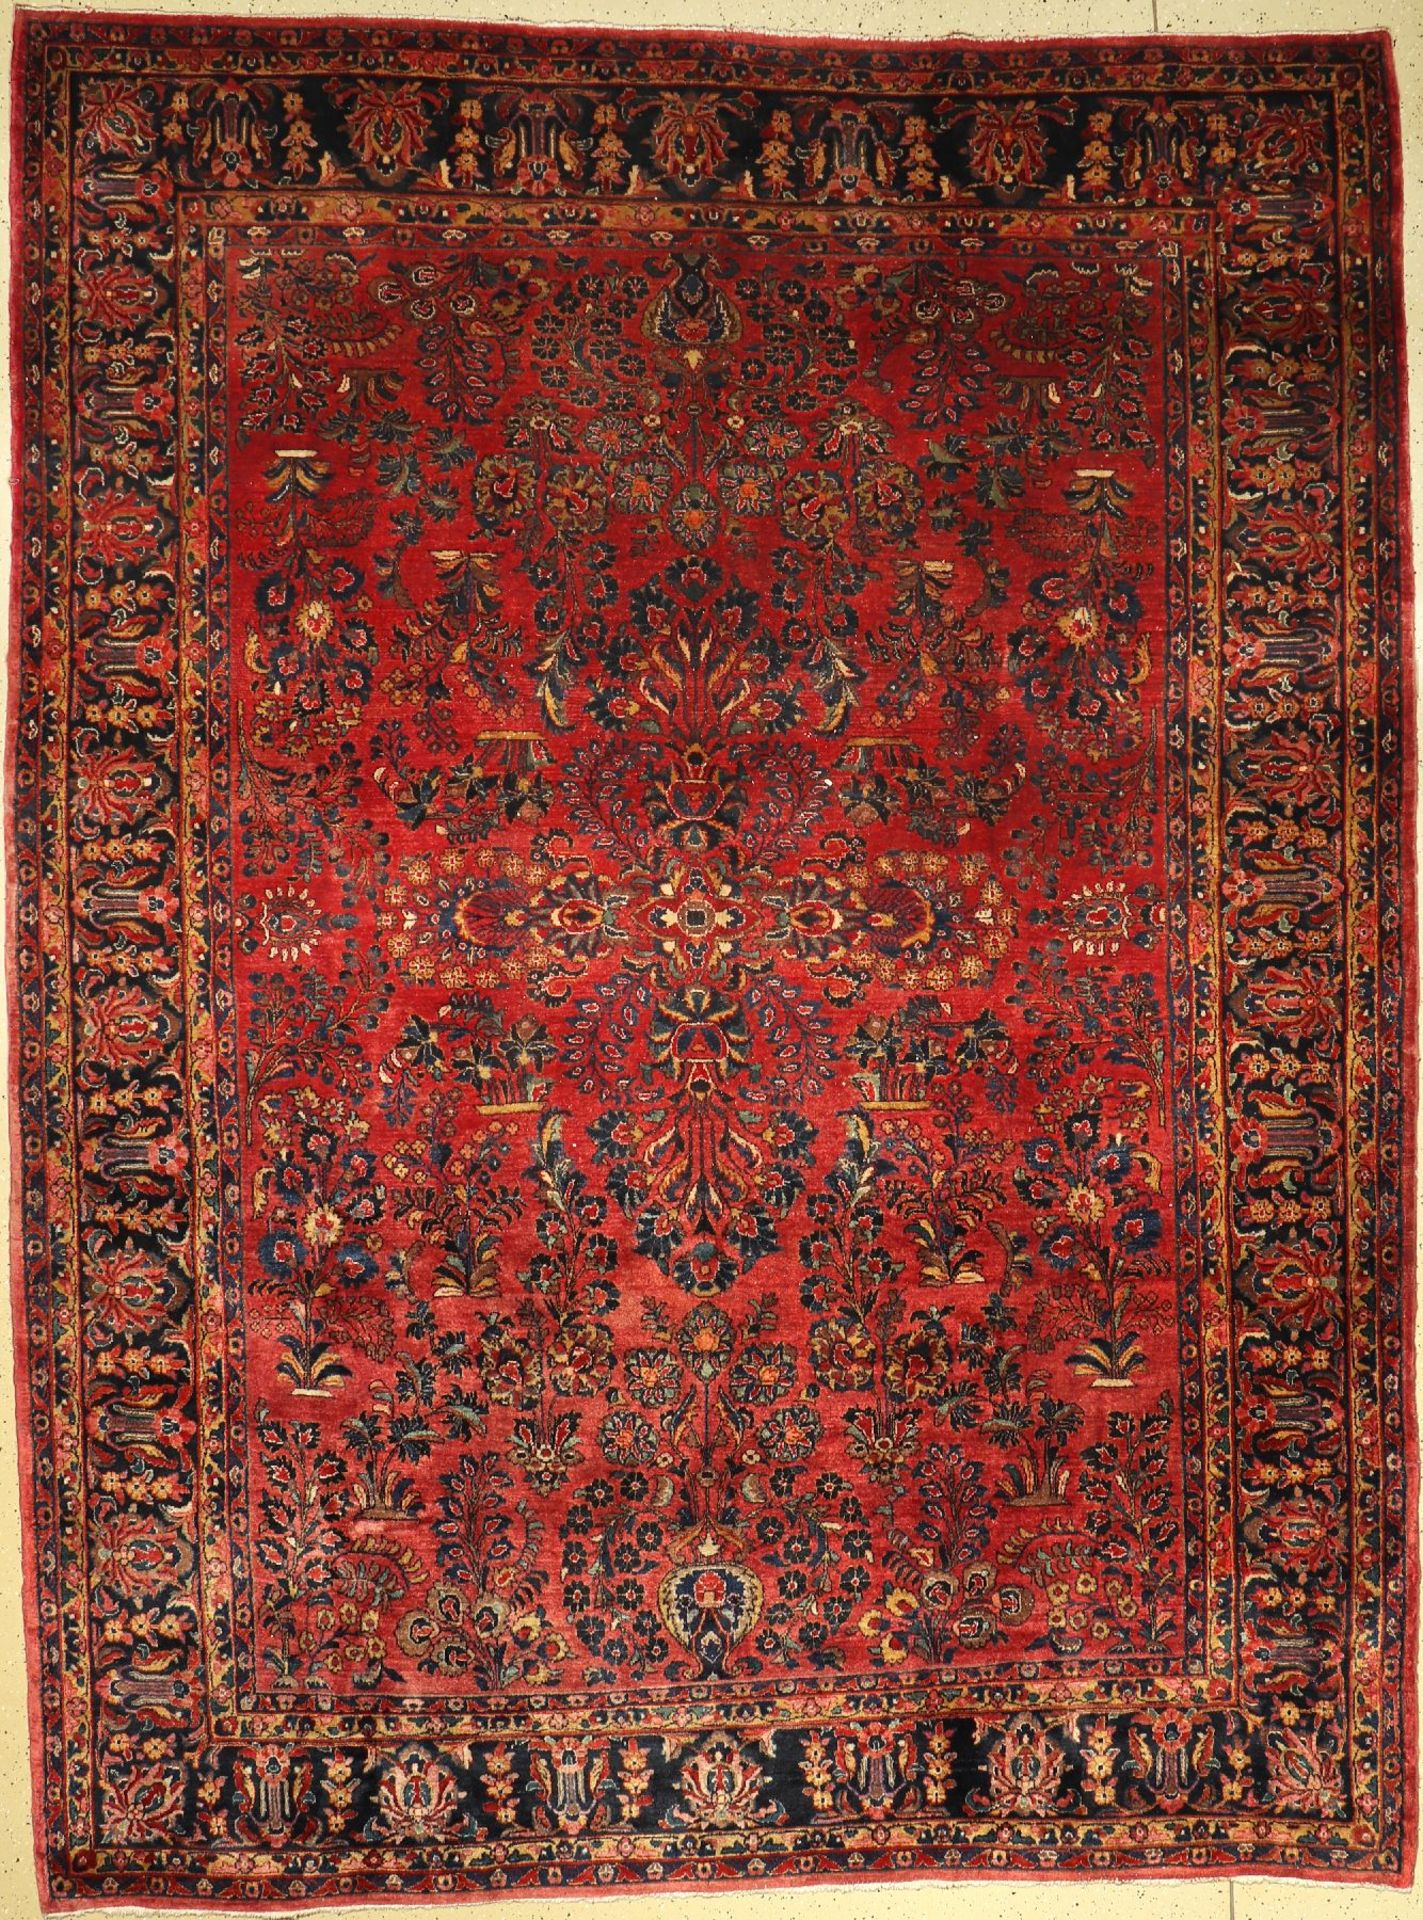 Us Saruk antique, Persia, around 1900, wool, approx. 368 x 266 cm, condition: 2-3. Auction: